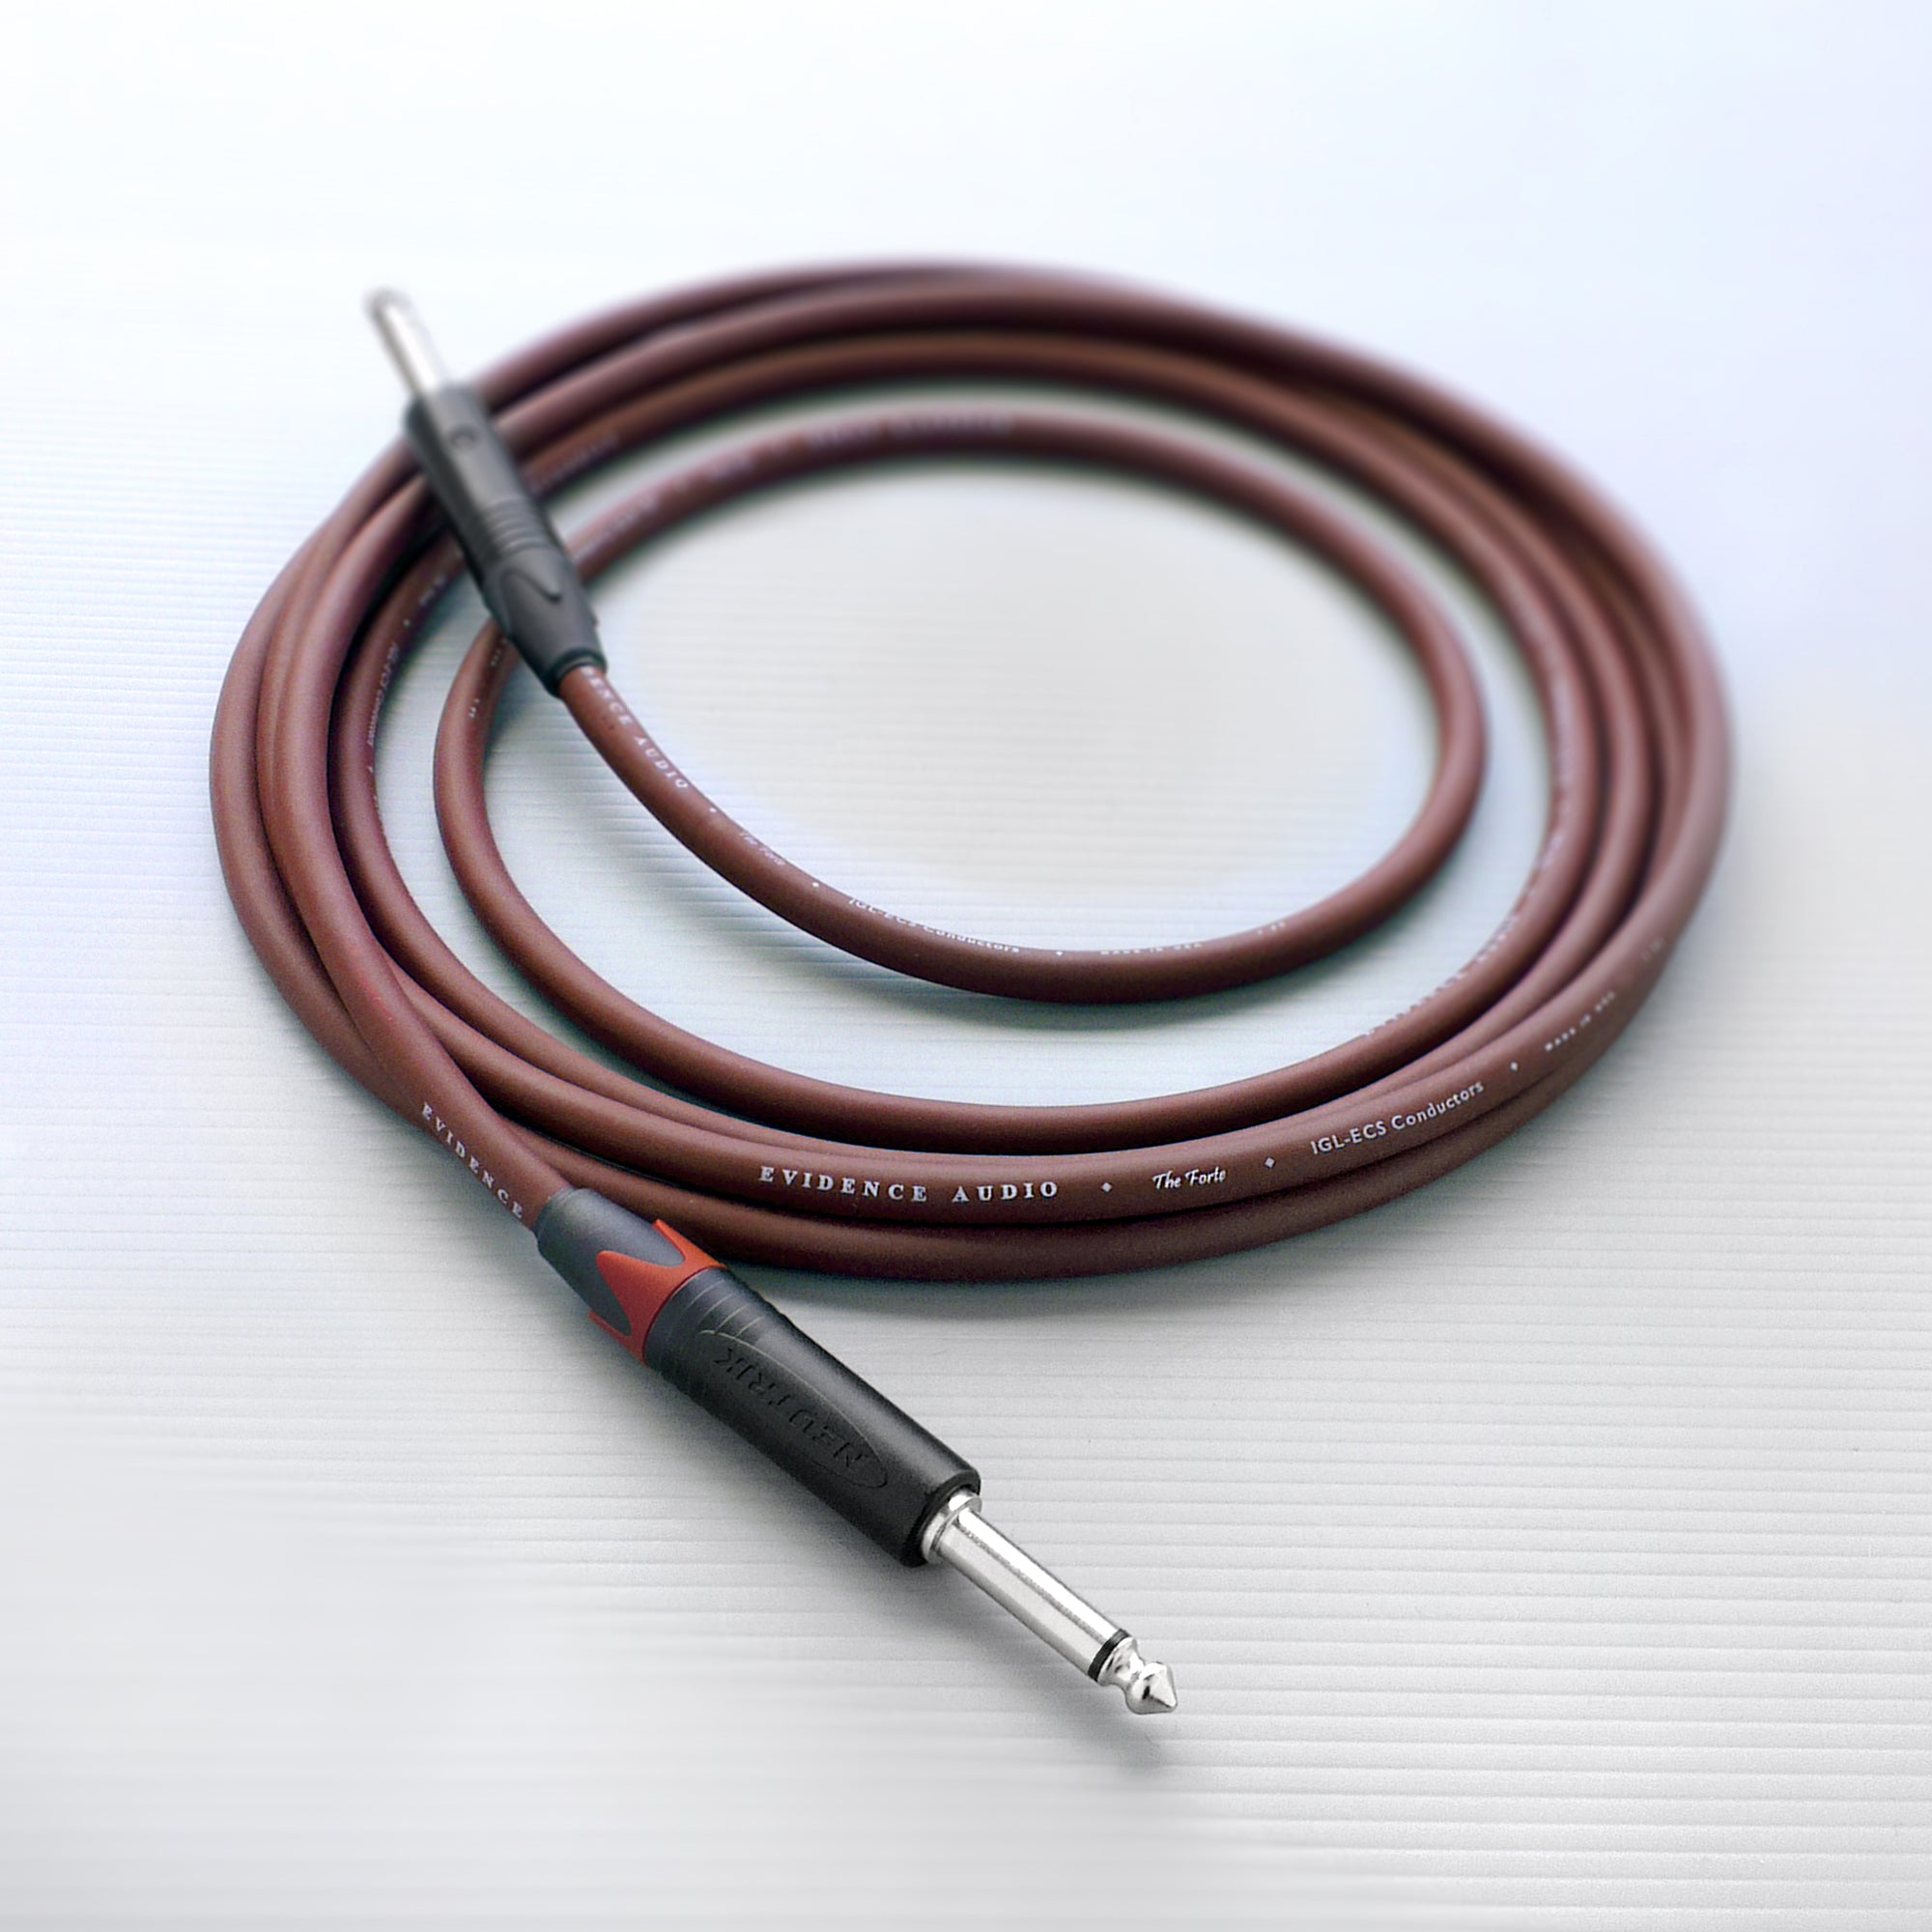 Evidence Audio Forte Guitar Cable - 15ft: Straight to Straight